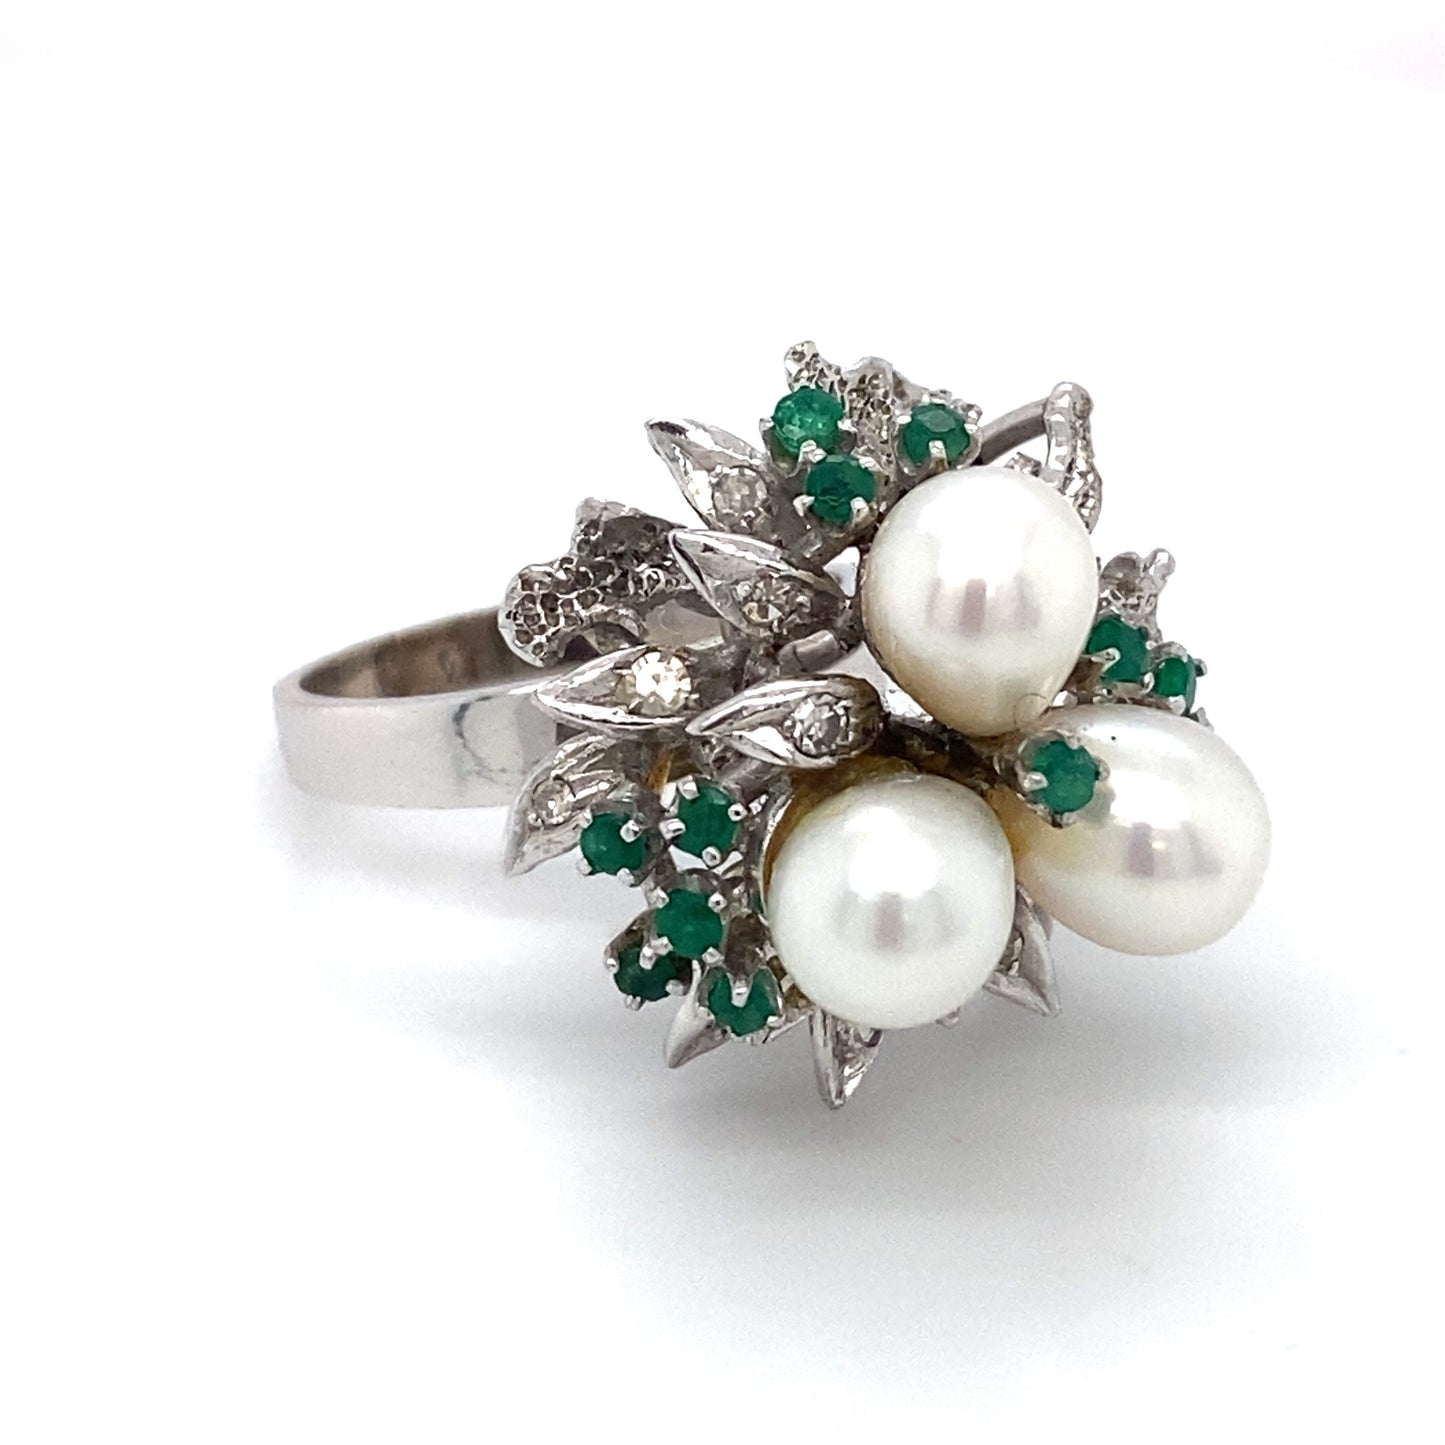 Circa 1960s Set of Earrings and Ring with Pearls and Emeralds in 14K White Gold